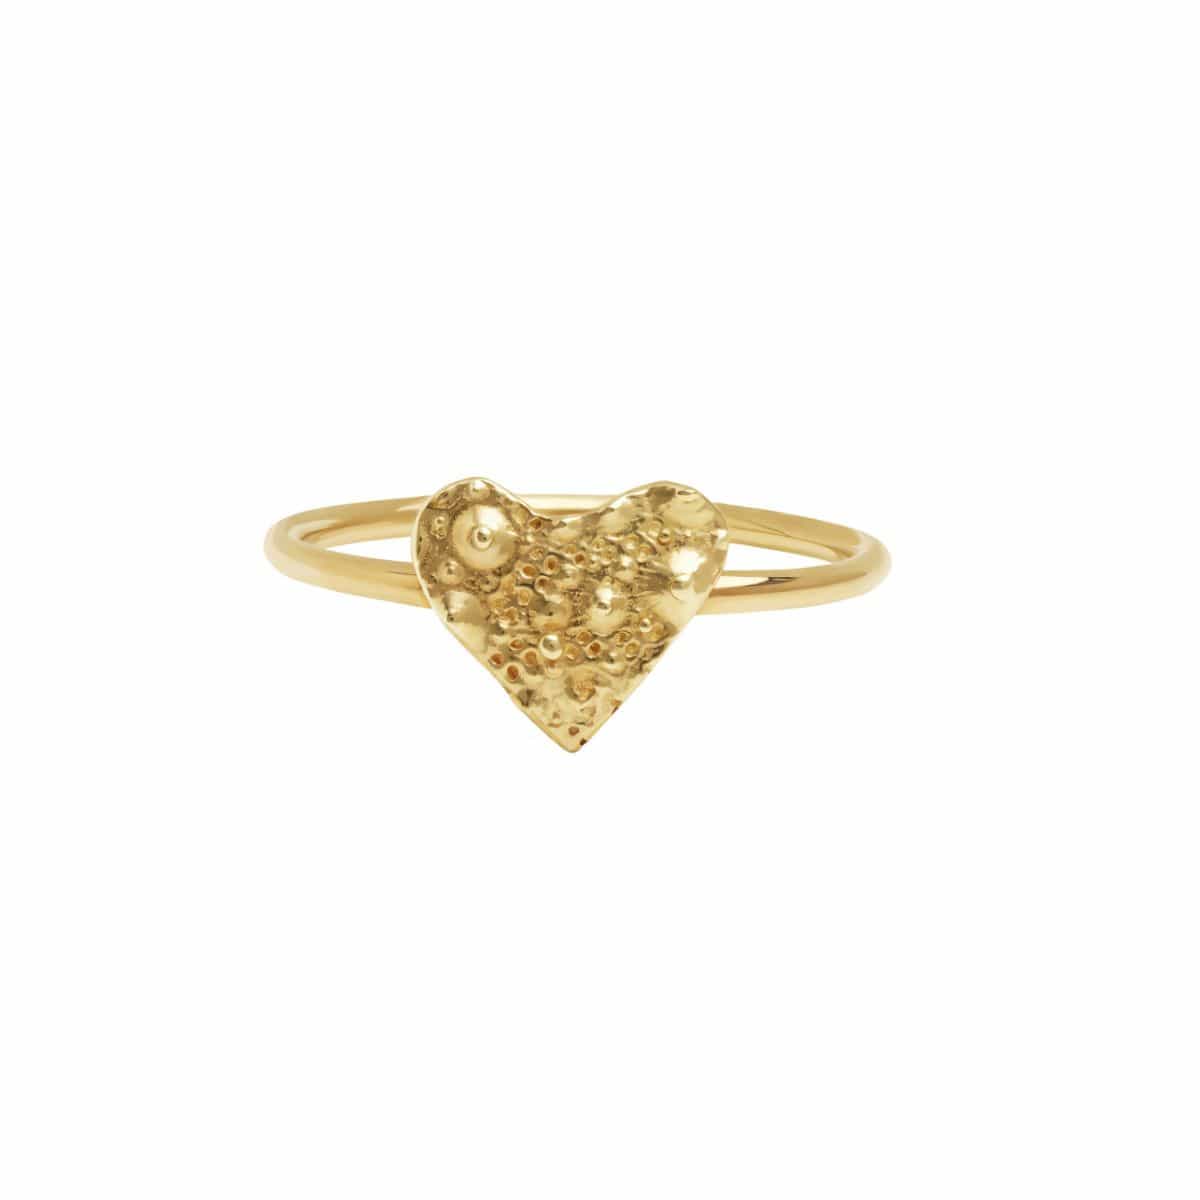 Sea urchin gold texture ring